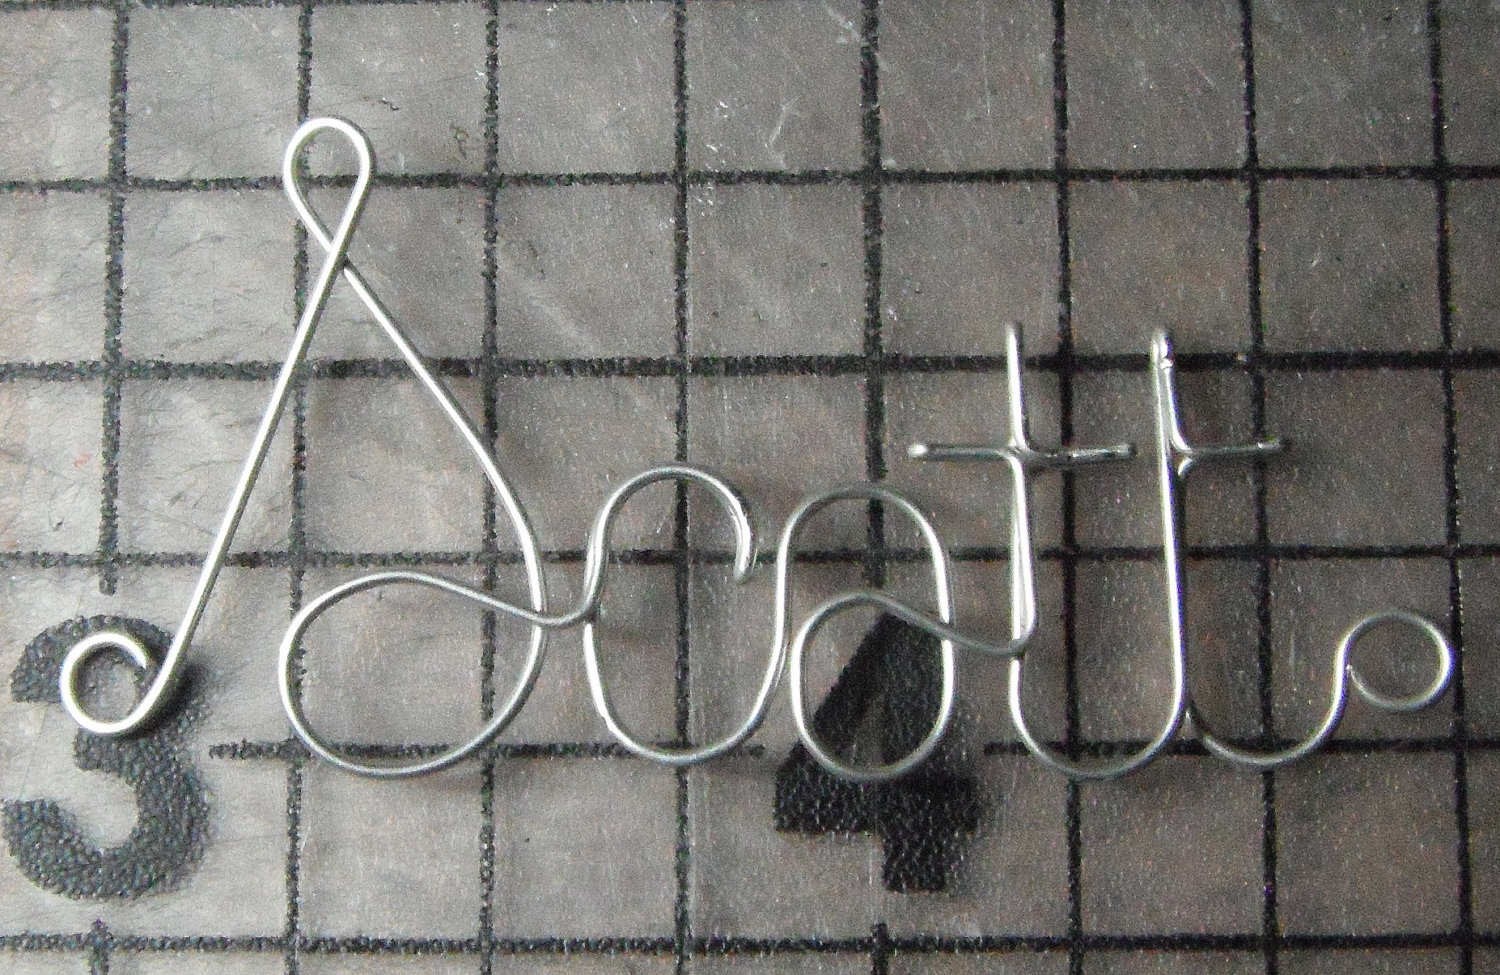 Scott's silver plated wire name